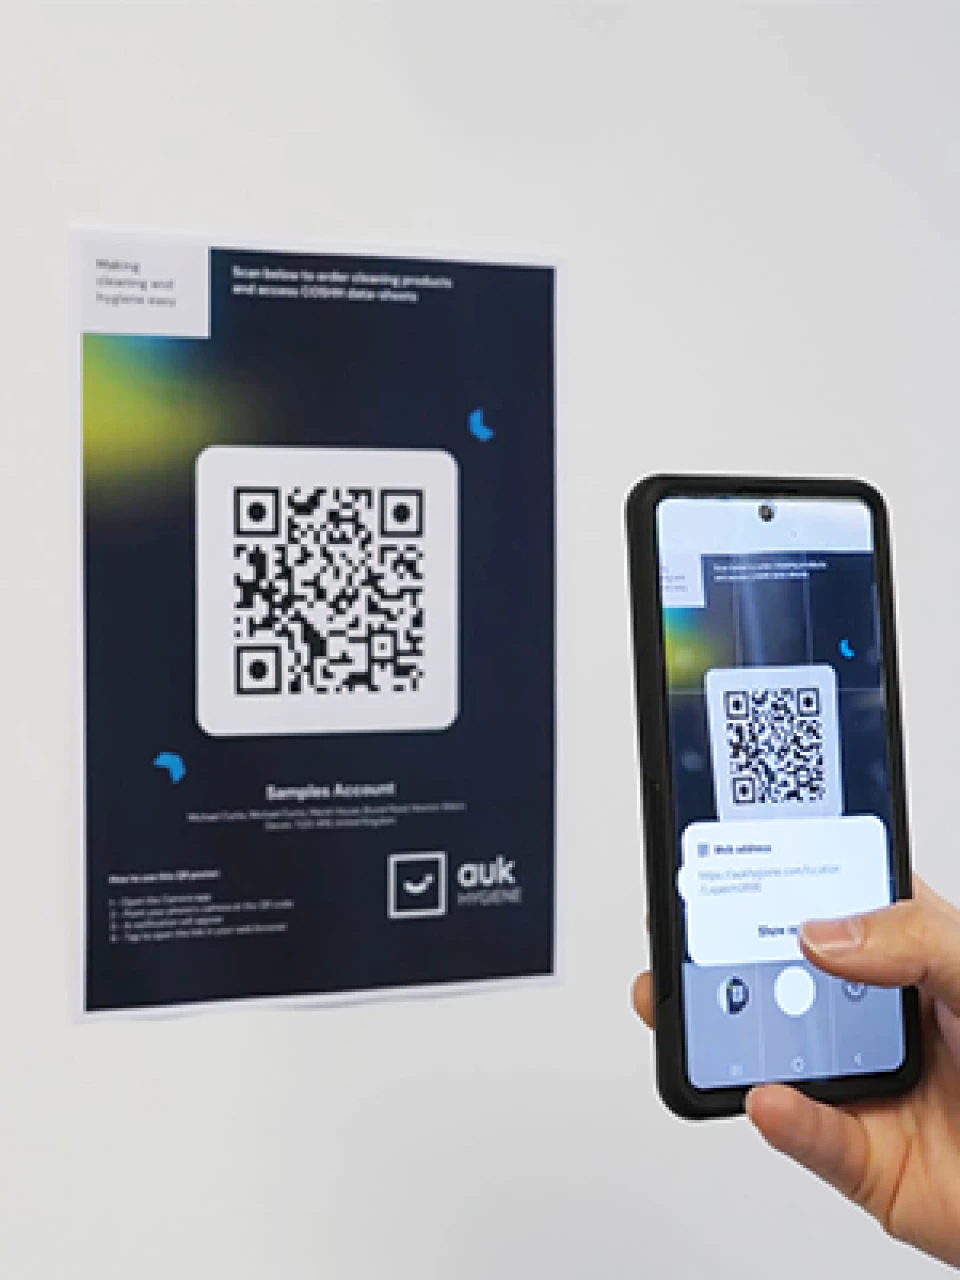 Fast & efficient ordering with 'Easy Access', our unique QR code system